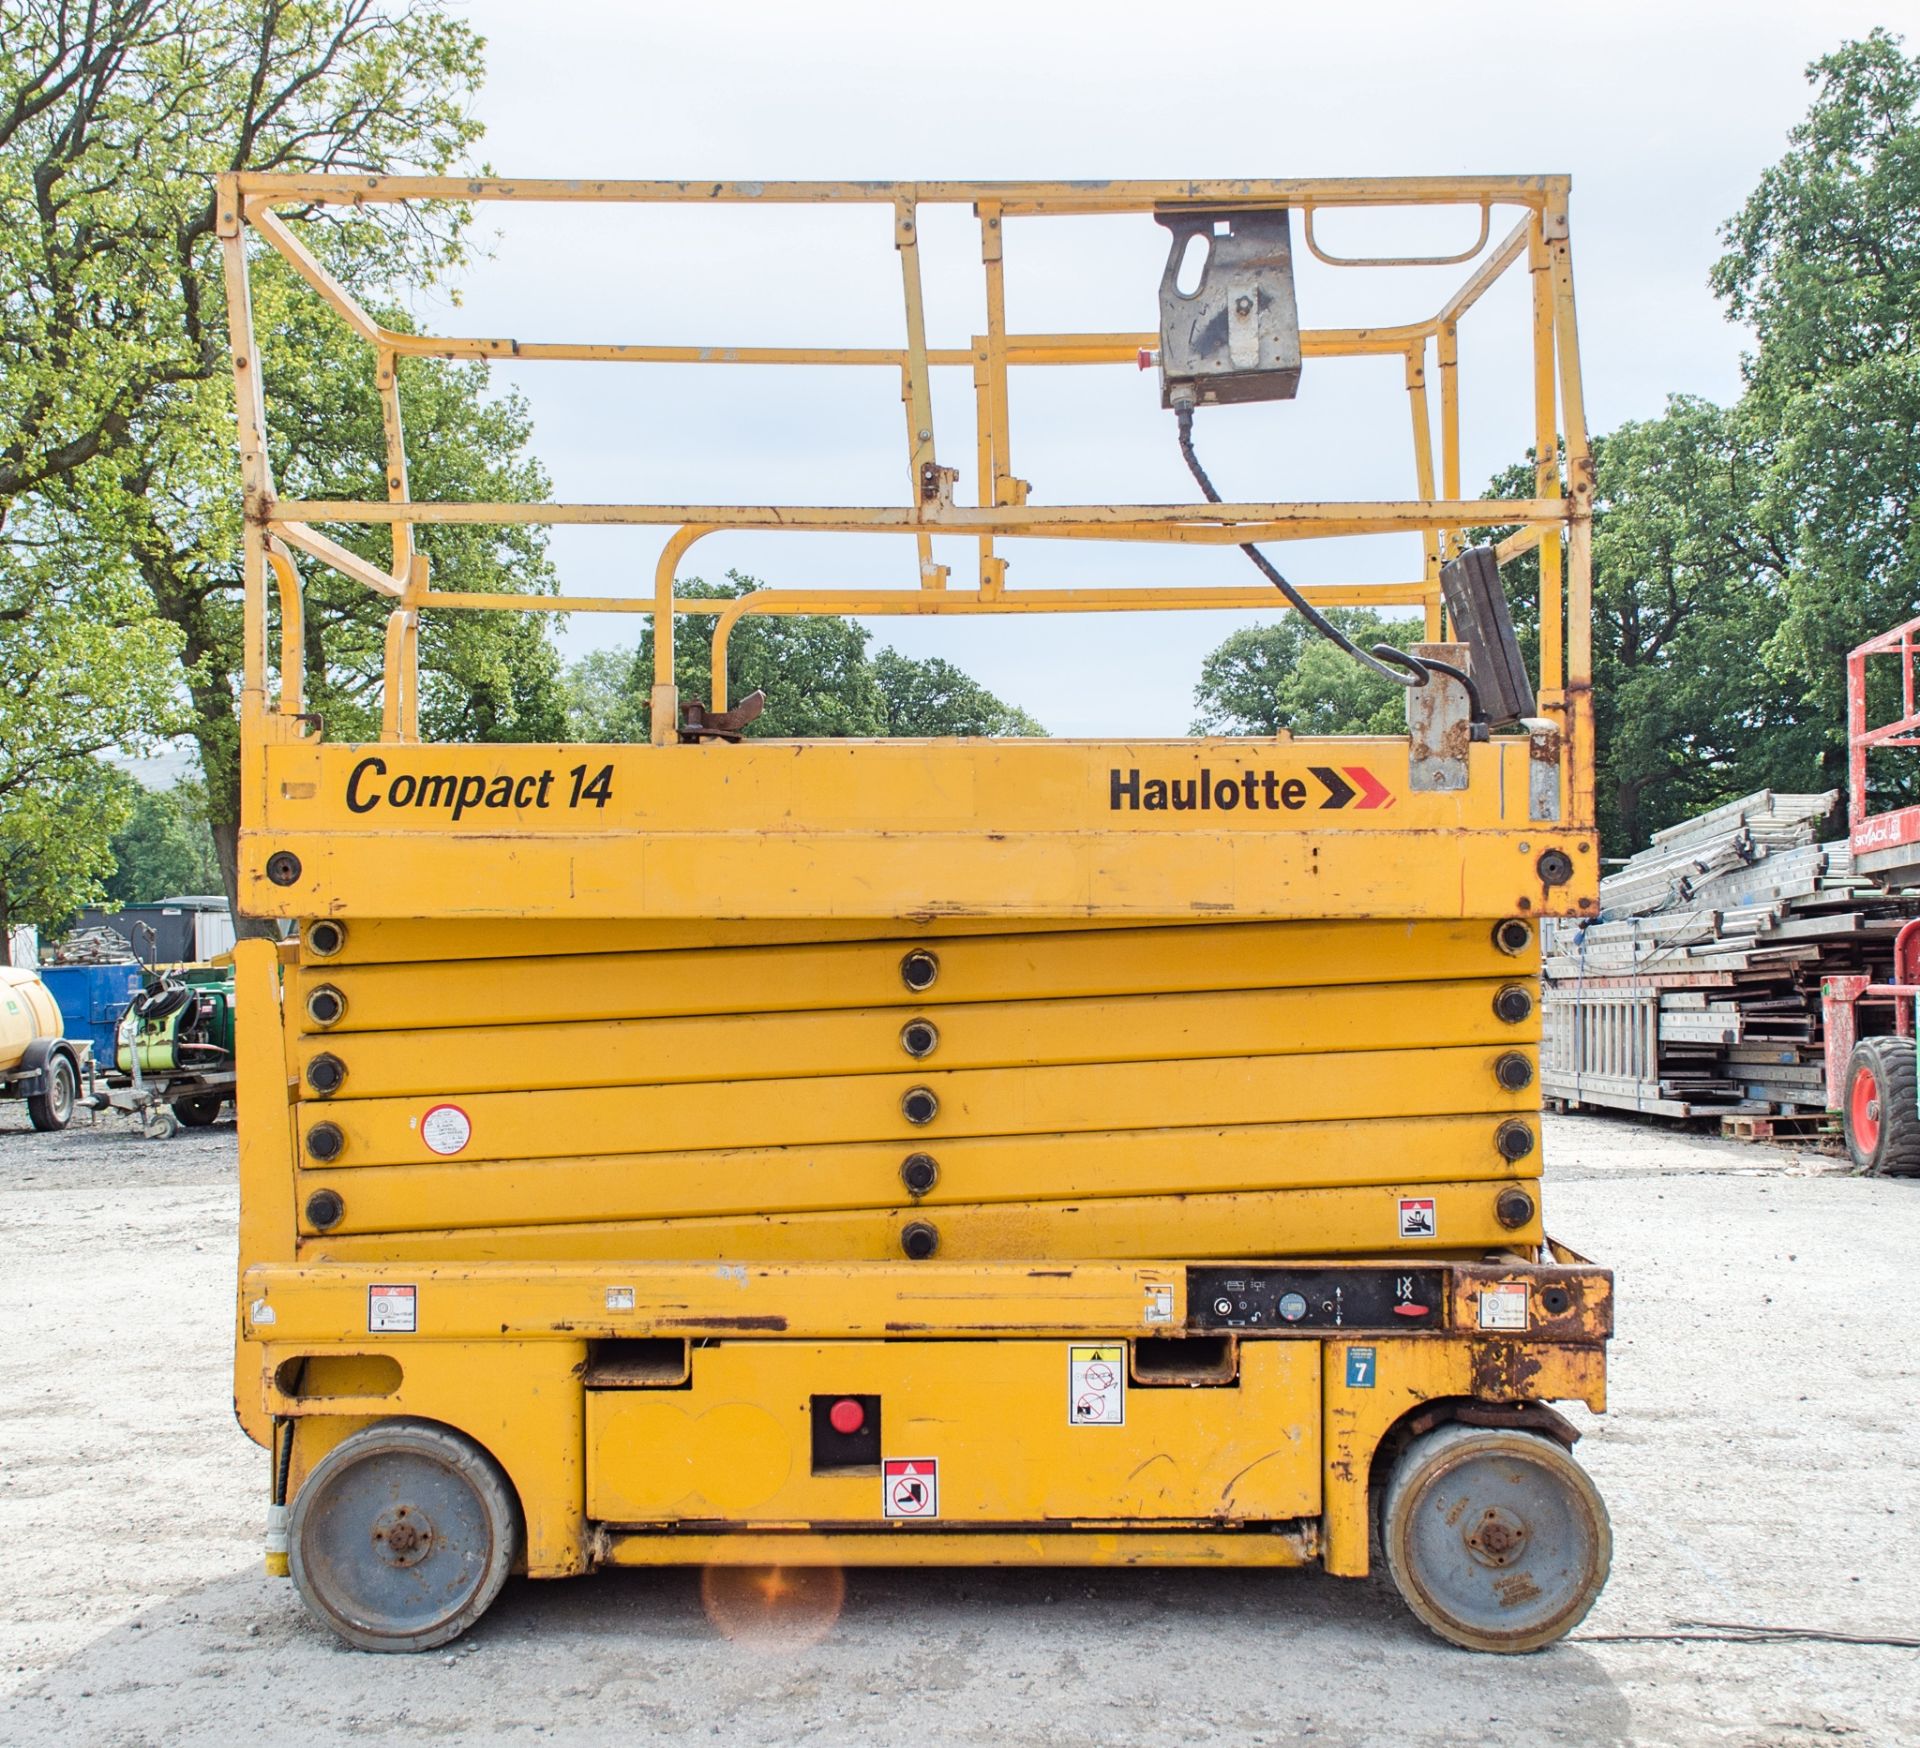 Haulotte Compact 14 battery electric scissor lift Year: 2010 S/N: CE143402 Recorded hours: 481 - Bild 5 aus 10